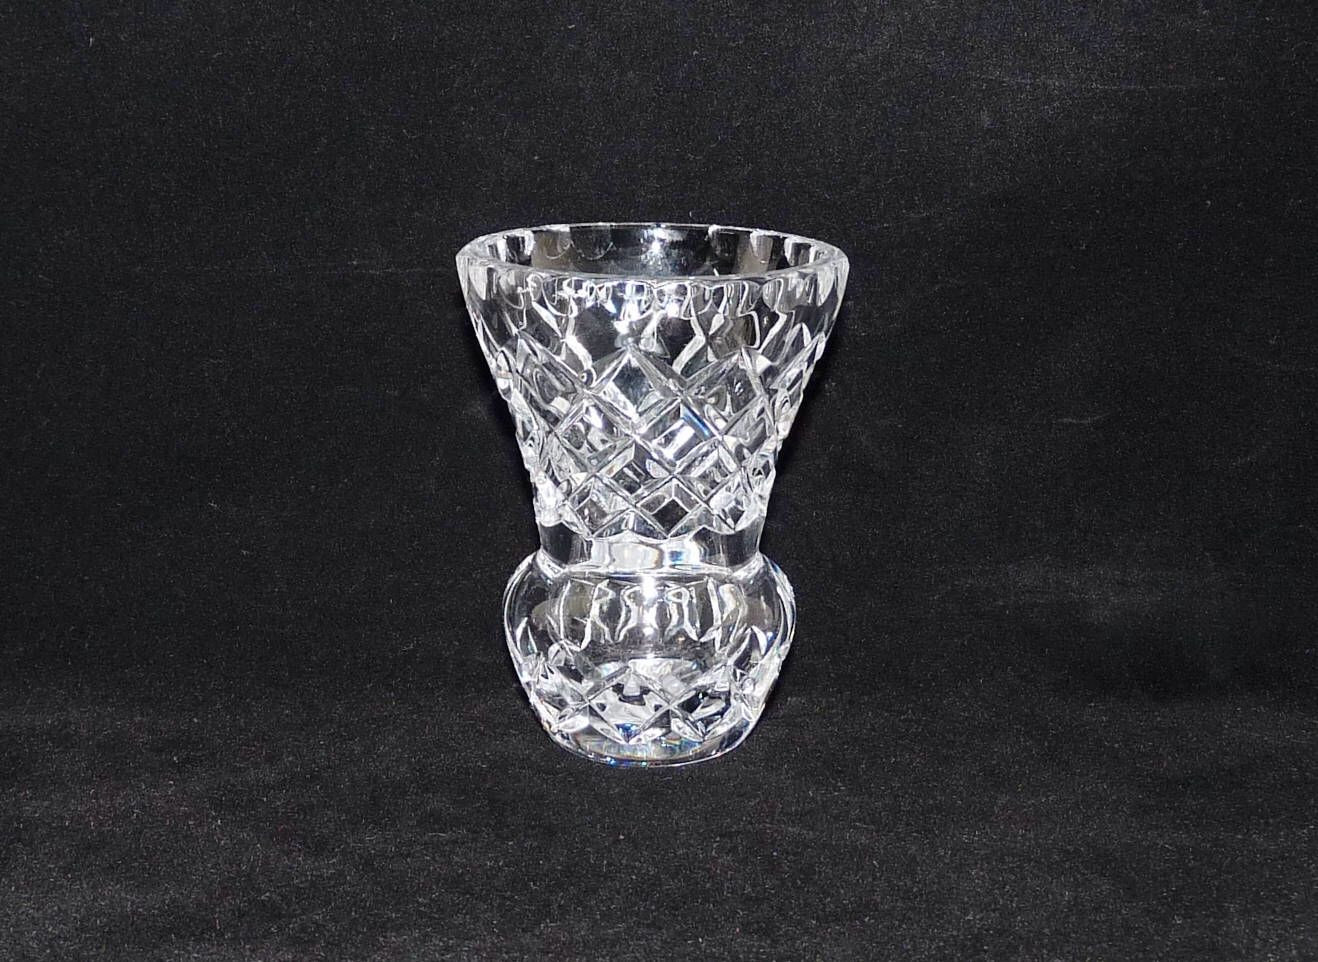 15 Best Glass Cross Vase 2024 free download glass cross vase of small glass vase criss cross pattern waisted thumb print rim regarding excited to share the latest addition to my etsy shop small glass vase